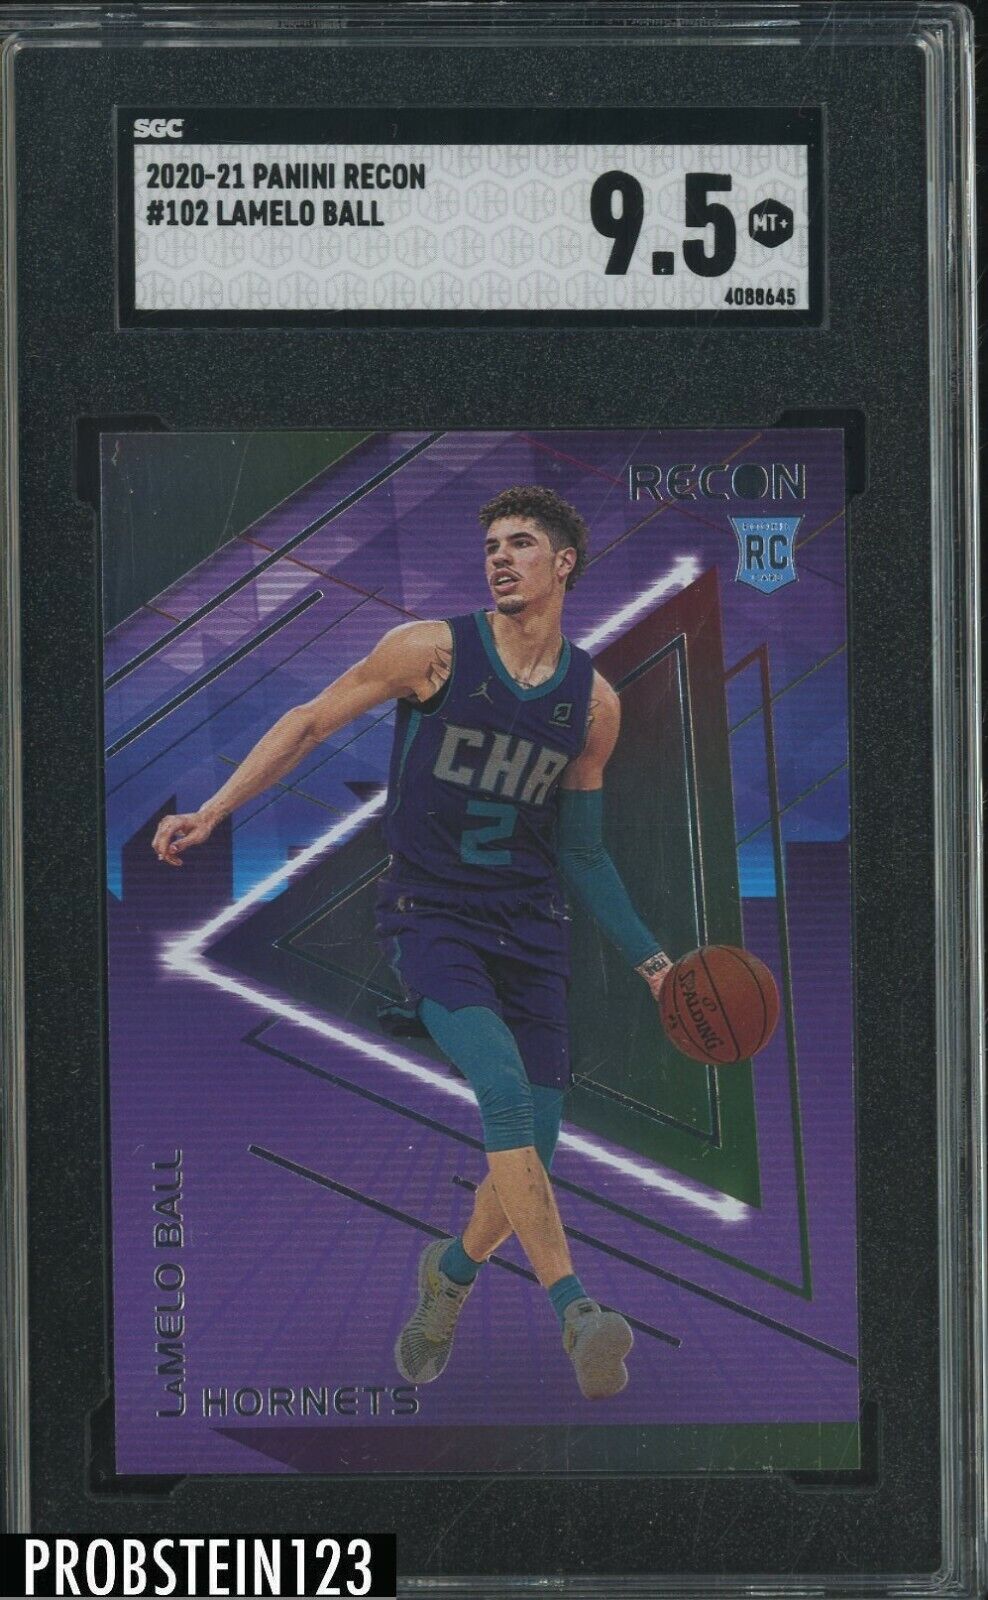 2020-21 Panini Recon #102 LaMelo Ball Hornets RC Rookie SGC 9.5 MINT+